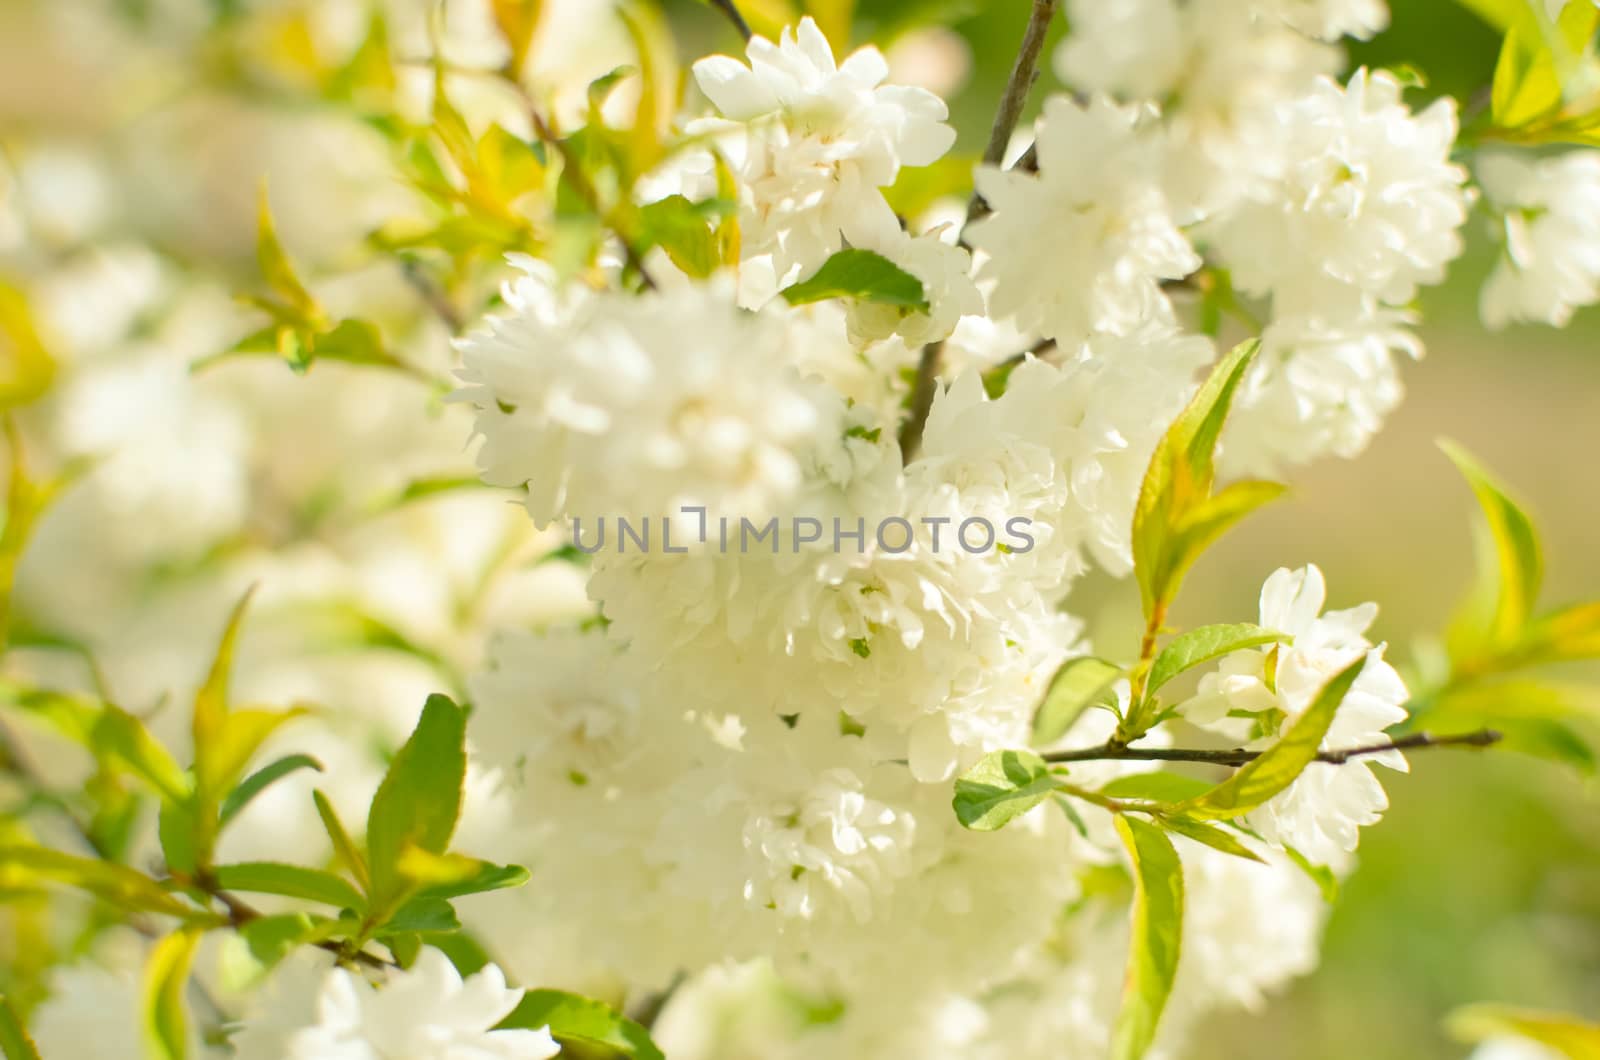 Delicate white flowers in spring cherry on blurred background. Soft focus, spring nature.